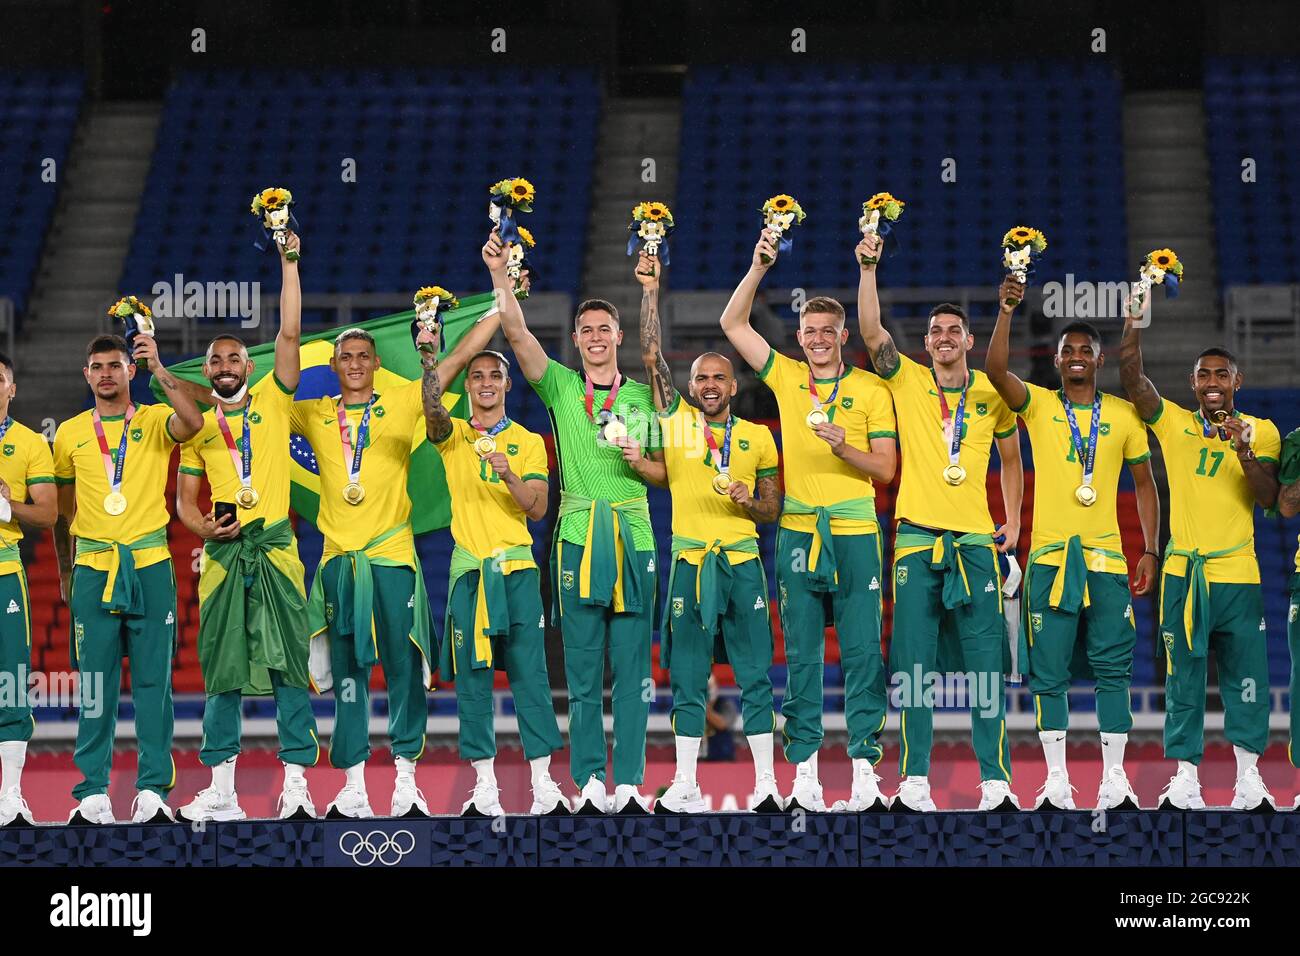 (210808) --, Aug. 8, 2021 (Xinhua) -- Gold medalist Team Brazil celebrate during the awarding ceremony for the men's football at the Tokyo 2020 Olympic Games in Yokohama, Japan, Aug. 7, 2021. (Xinhua/Lu Yang) Stock Photo